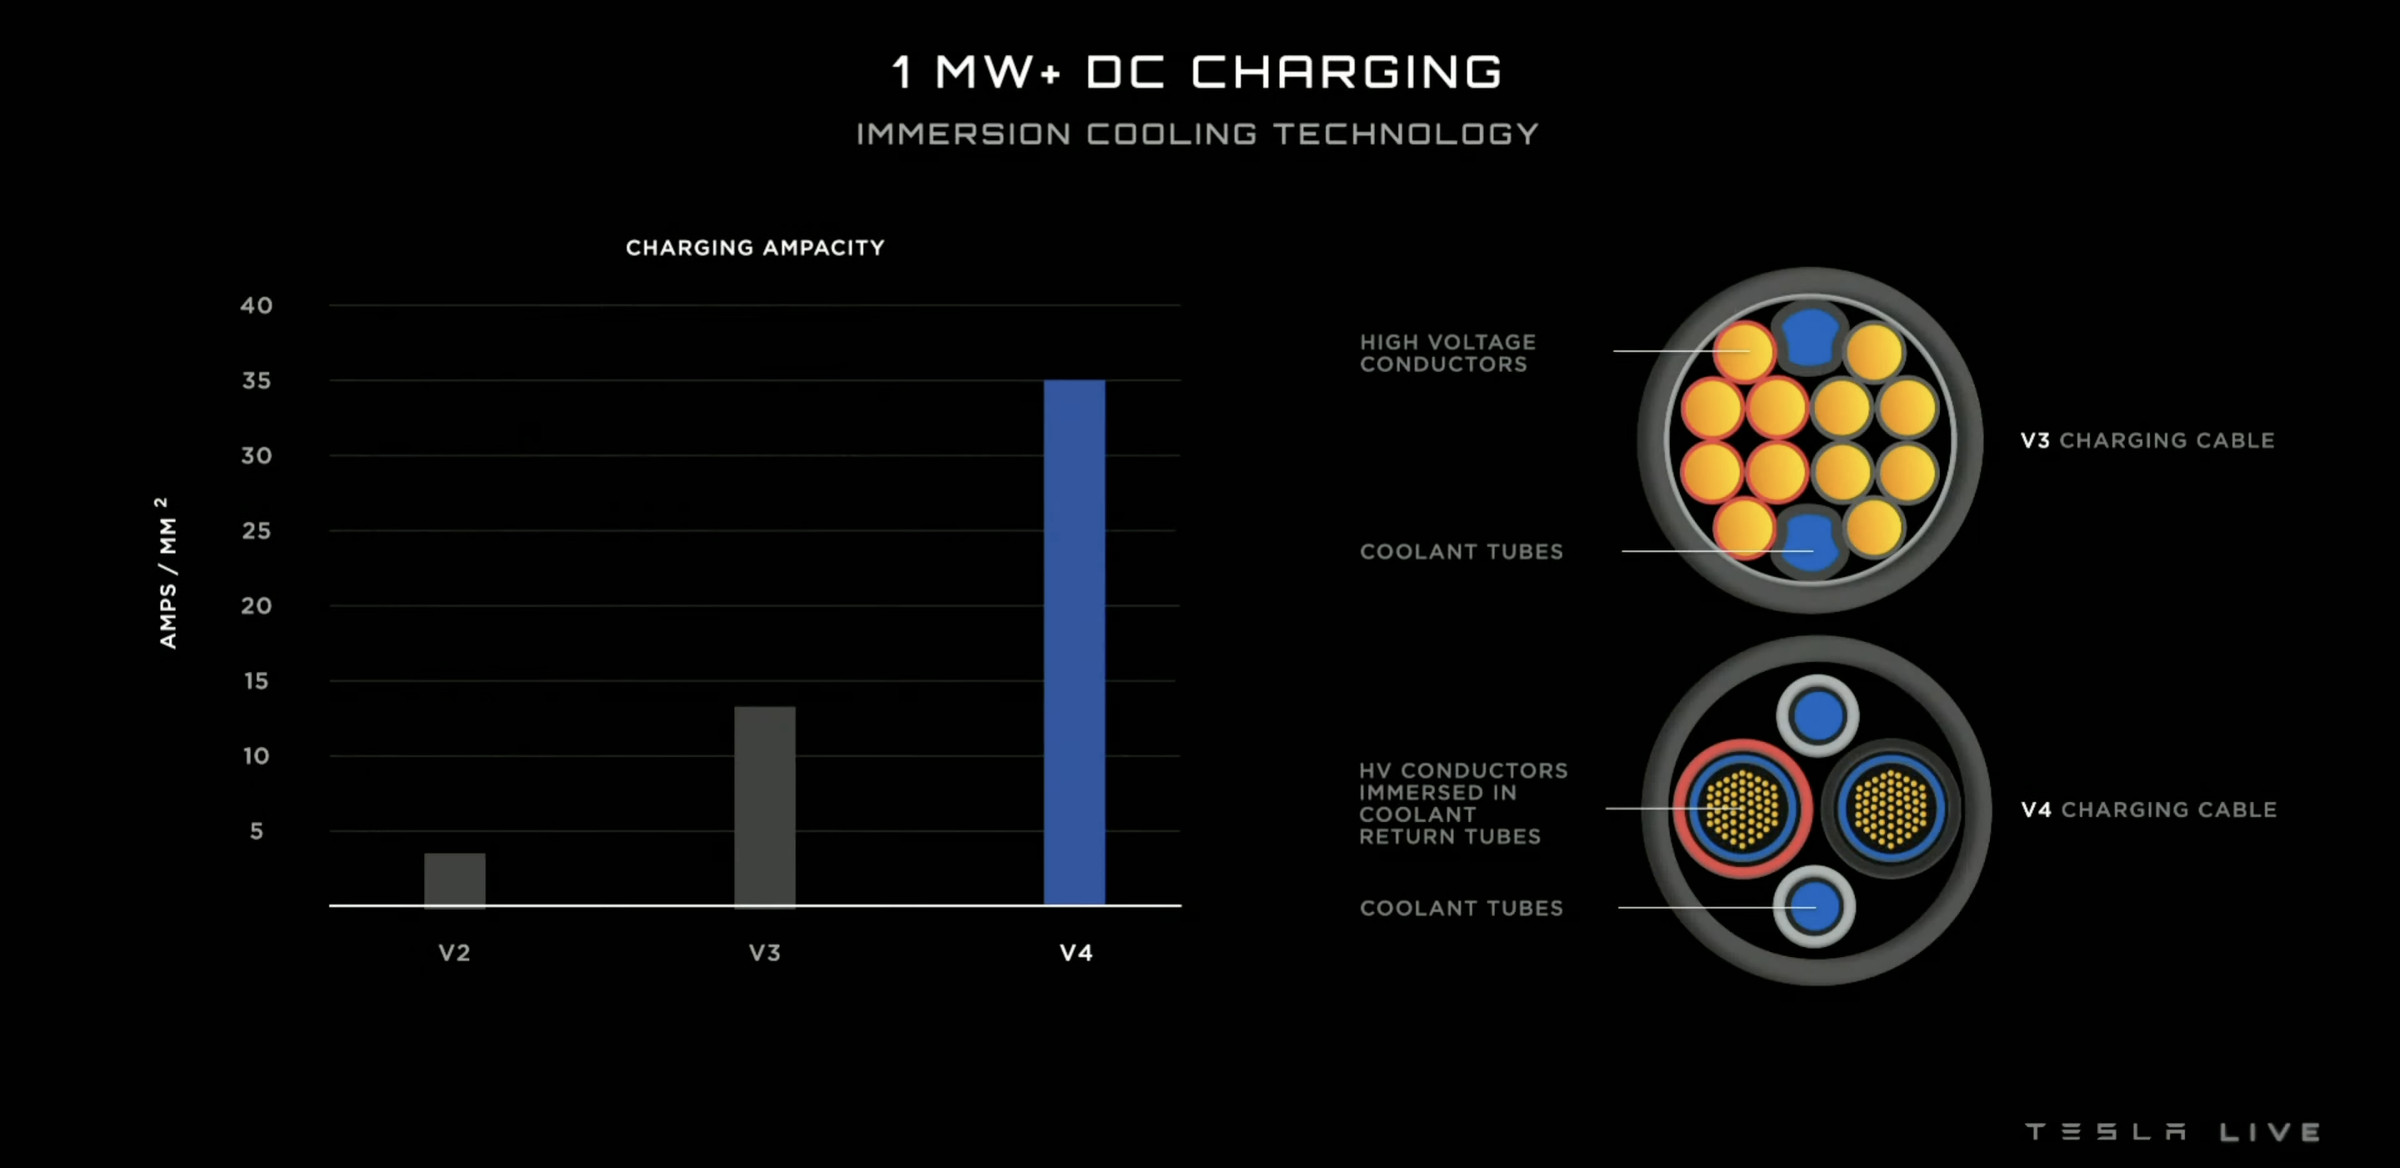 Slide showing a graph of Tesla’s V4 charging cable charging ampacity, which reaches 35 amps per square millimeter, and showing how the conductors are immersed in coolant tubes.